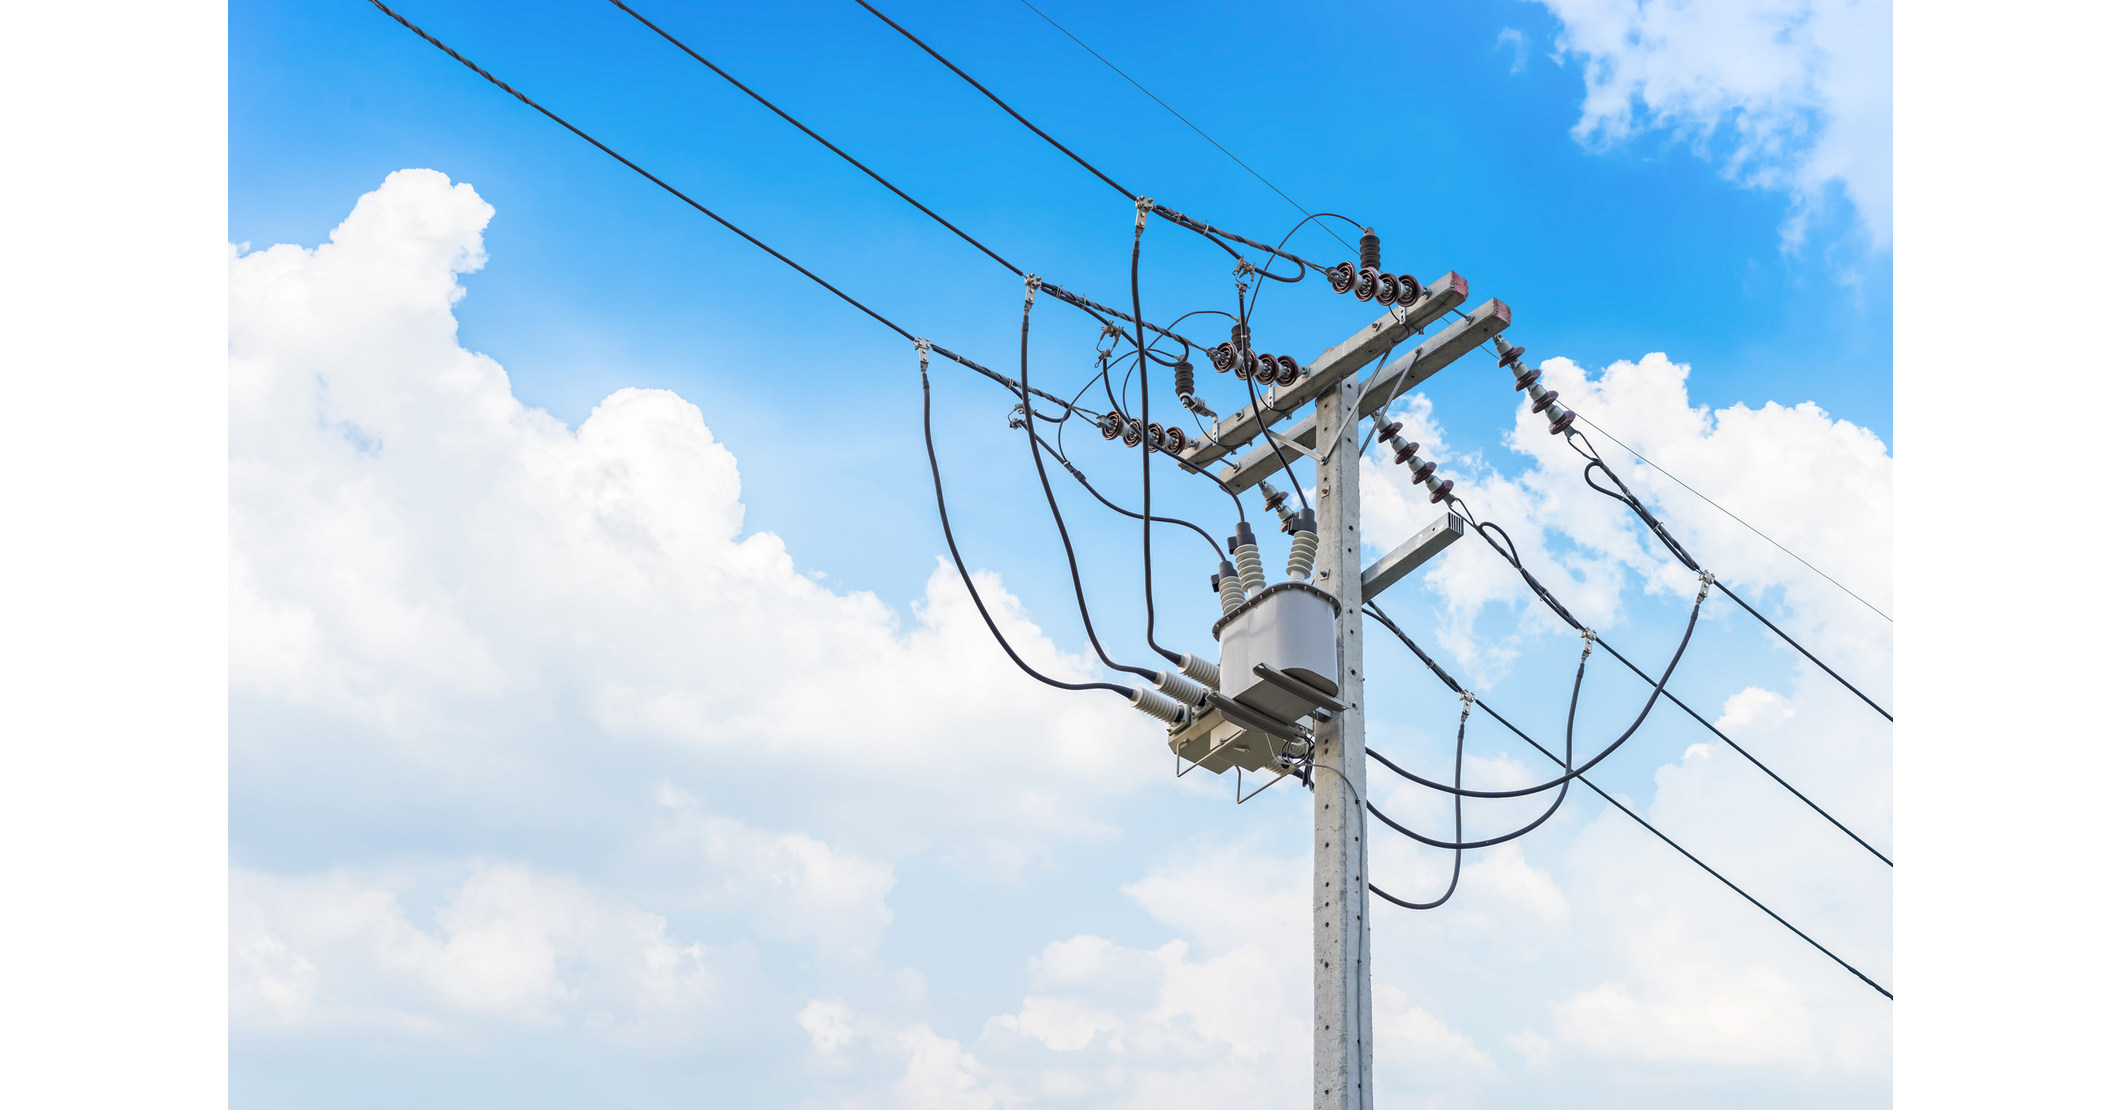 pseg-long-island-upgrades-the-grid-to-protect-customers-from-future-storms